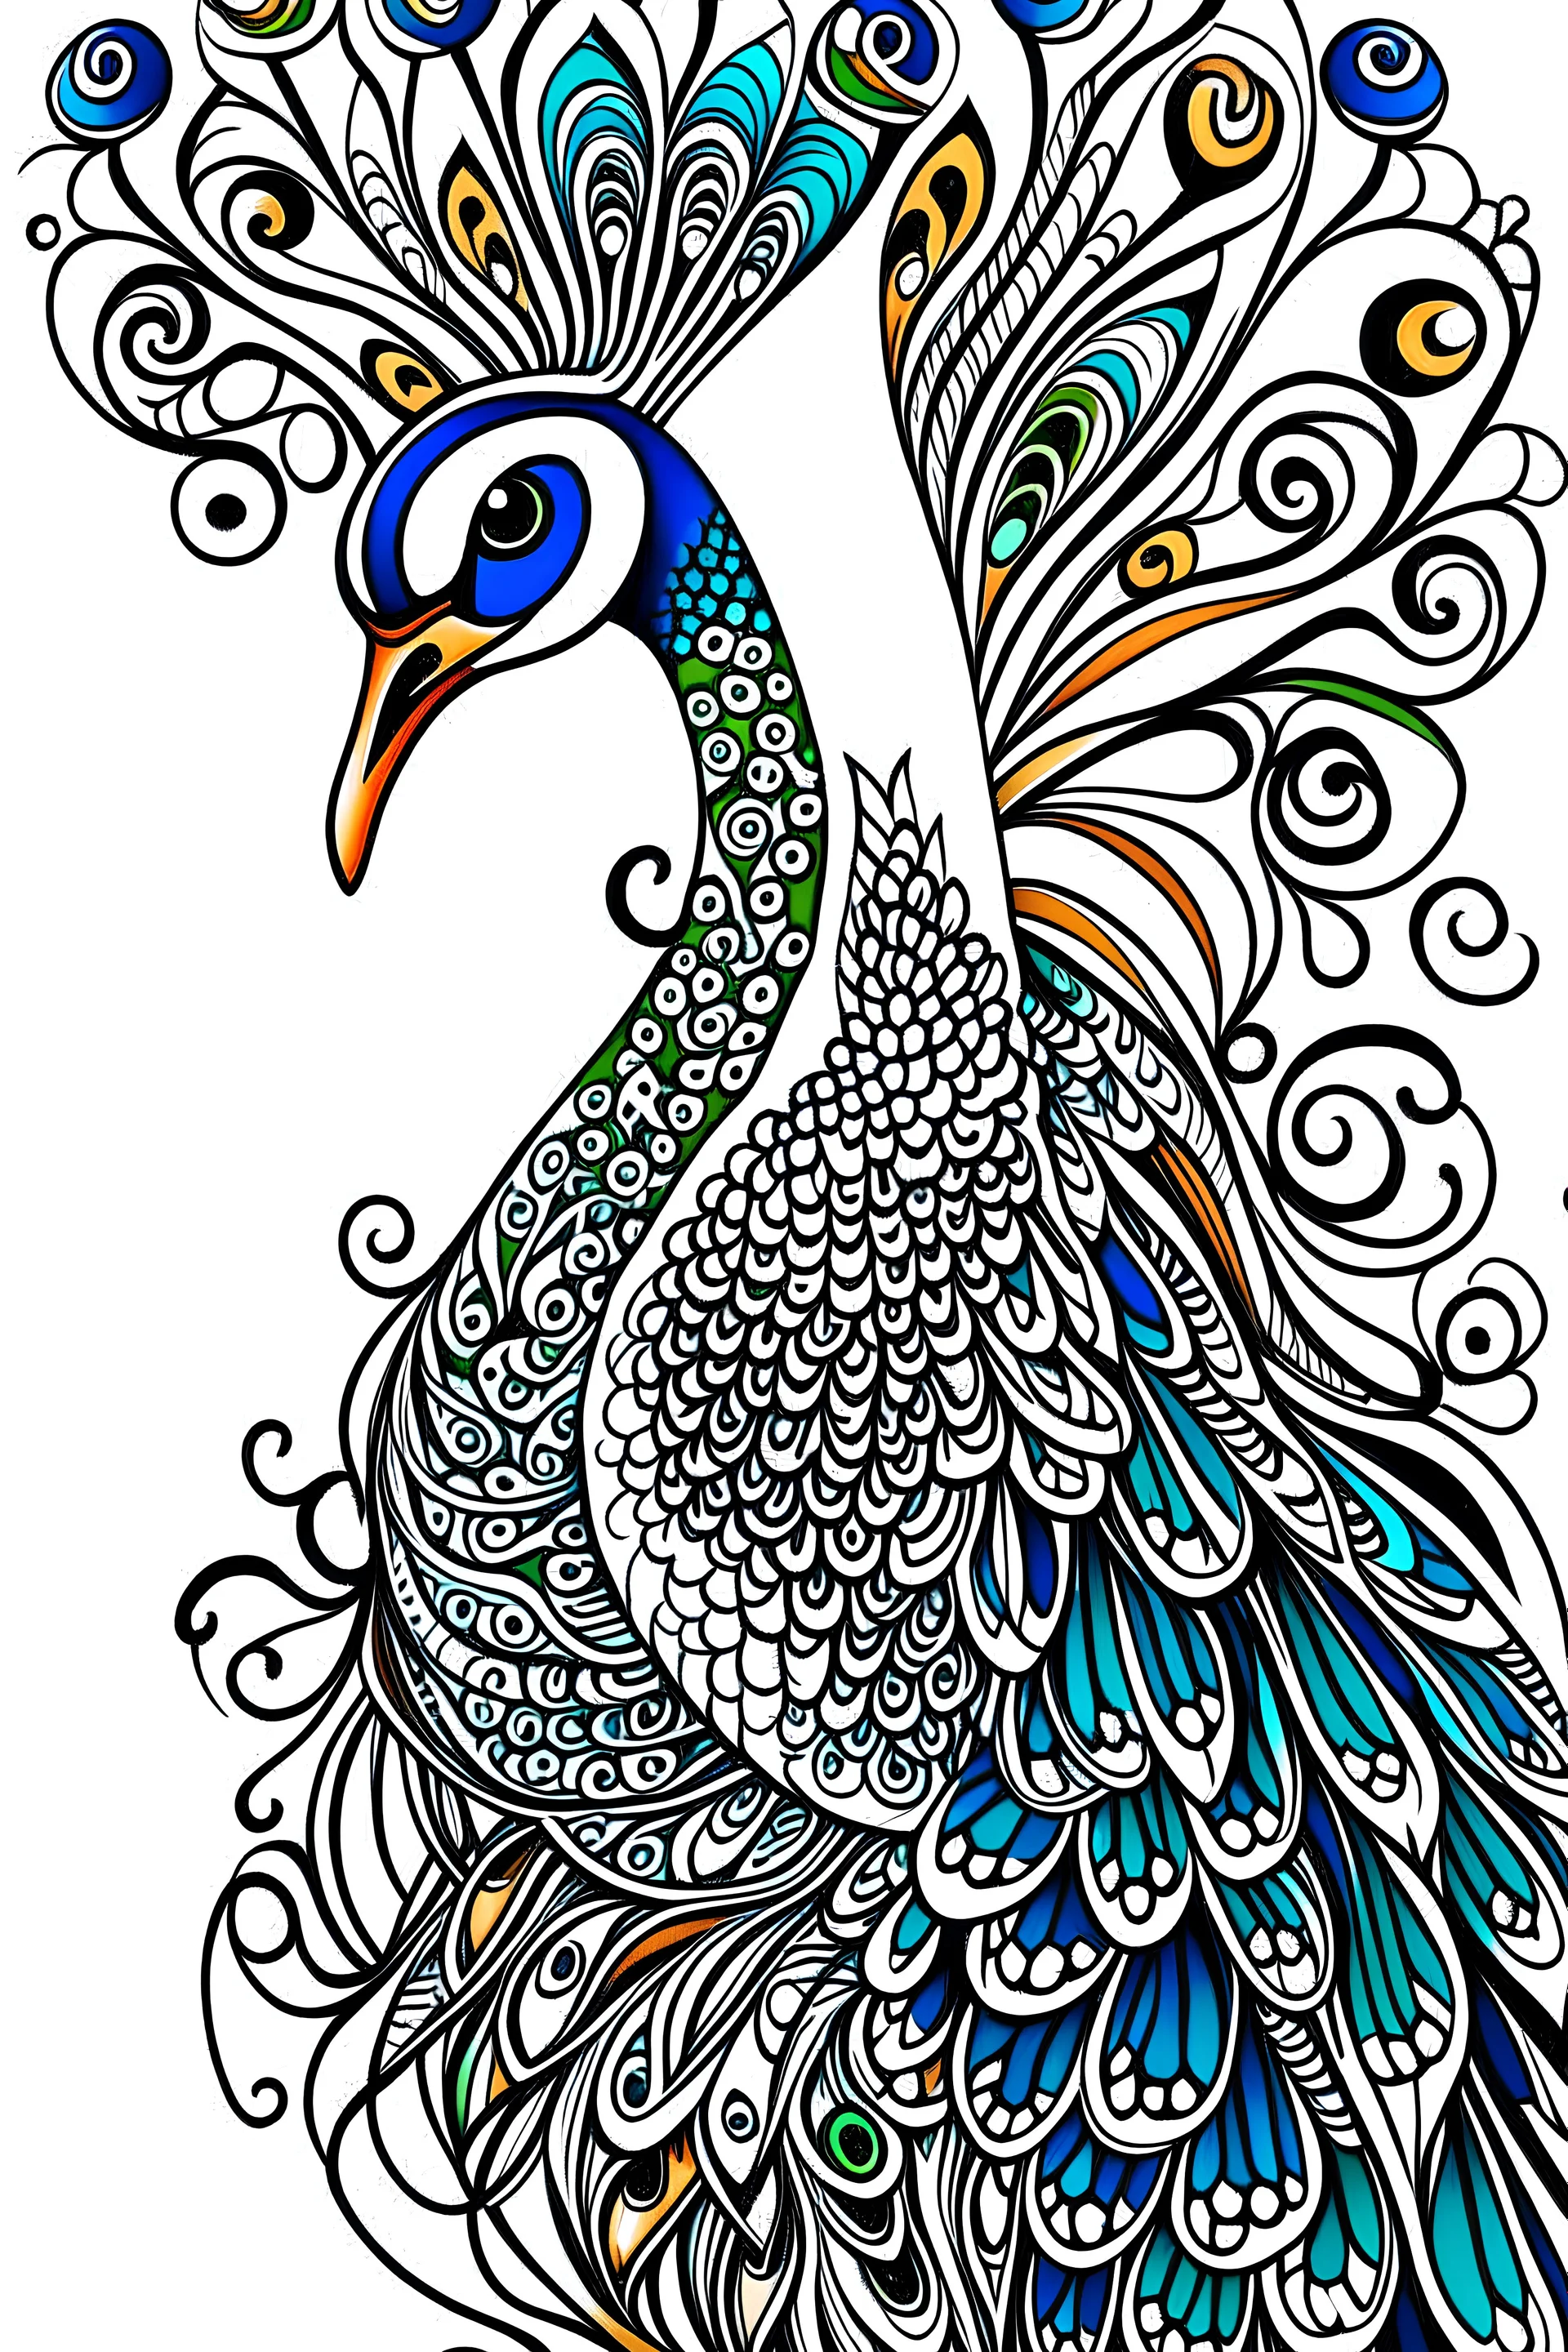 Monochrome Peacock Hand Drawn Peecoock Isolated Black Silhouette On White  Page Book Stylized Pavonine Animal Bird Vector Illustration Peafowl Art  Design Stock Illustration - Download Image Now - iStock